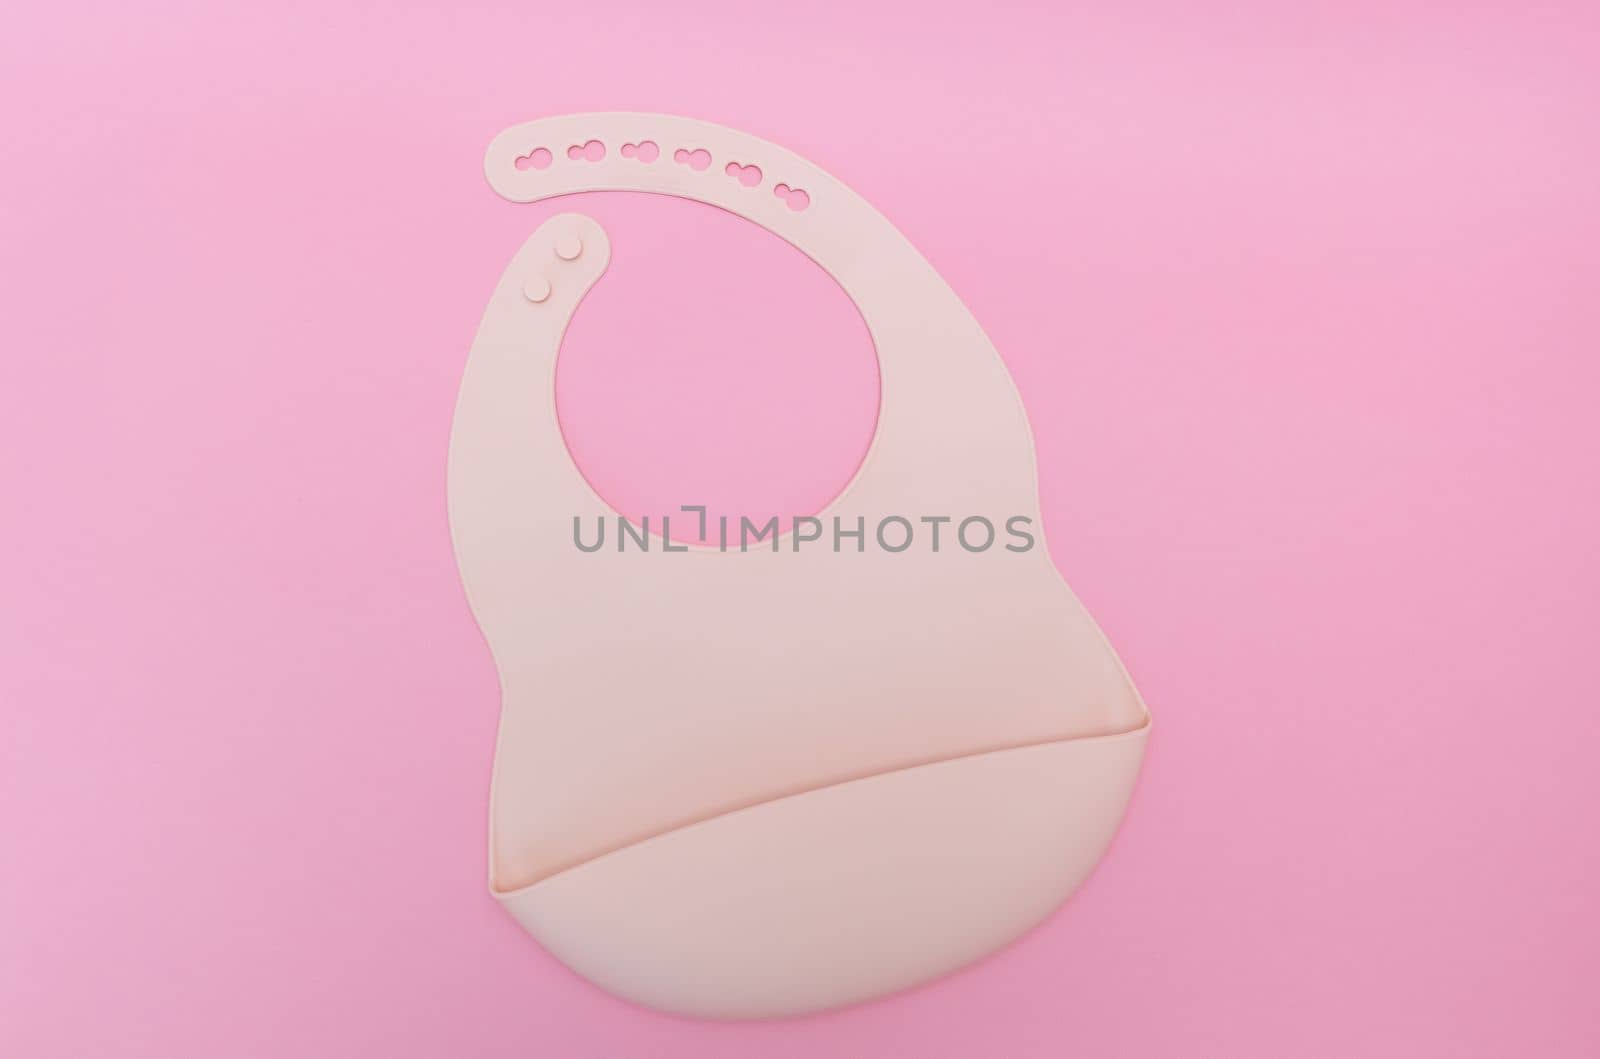 Silicone bib. Pastel pink color. Baby lead weaning.